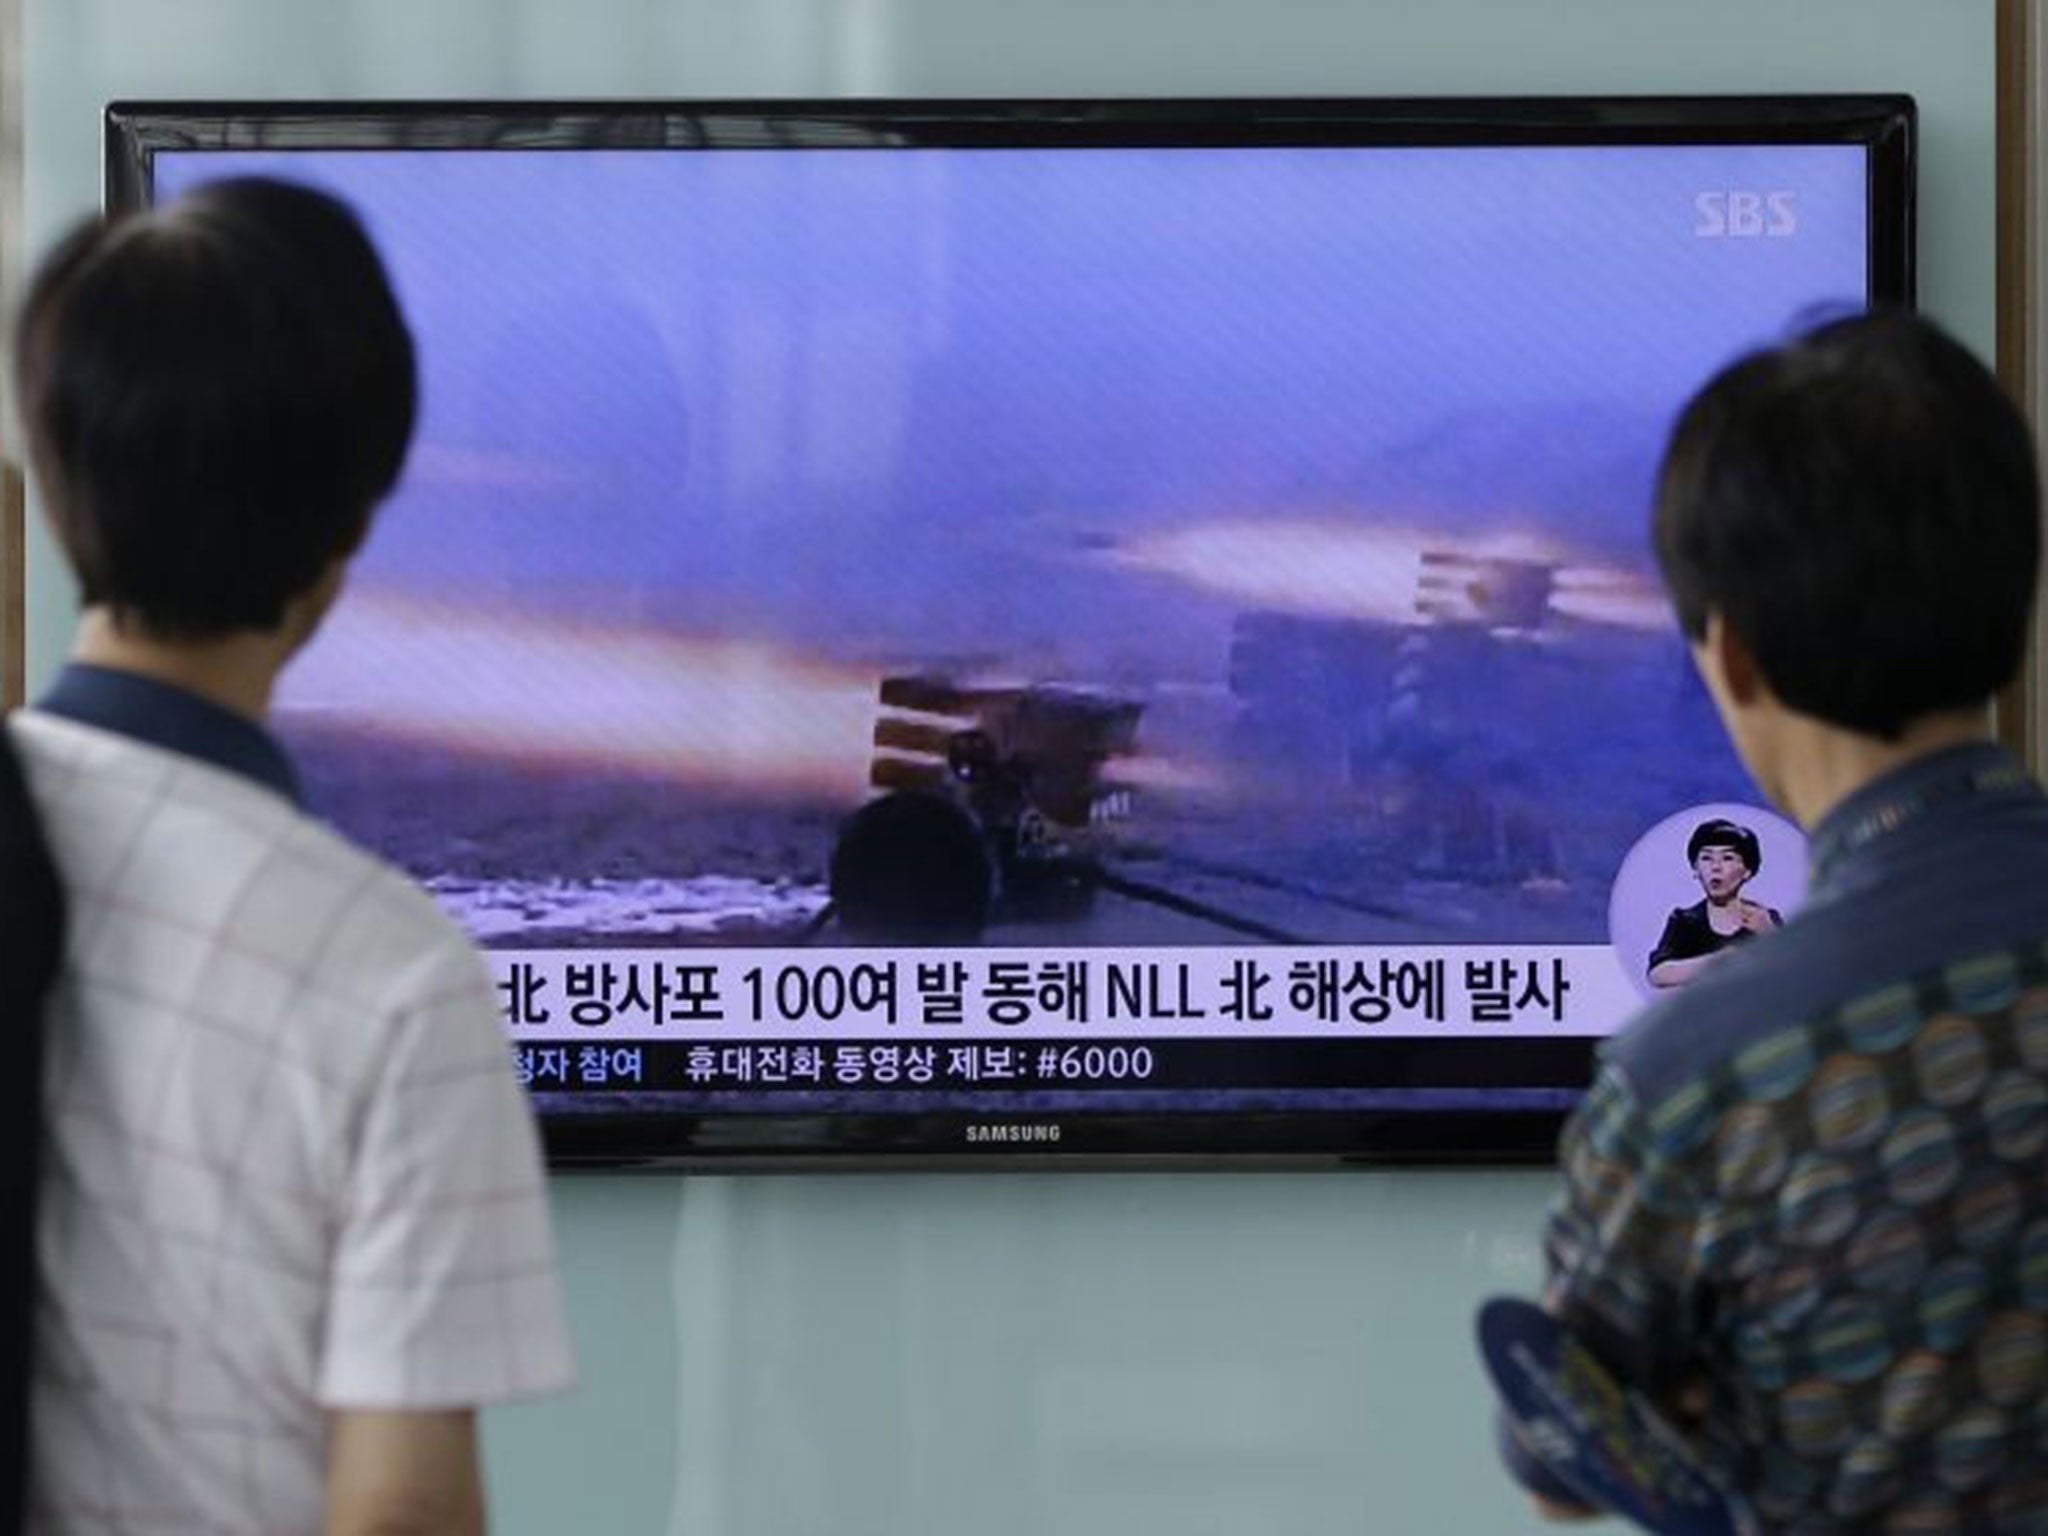 People watch a TV news programme reporting on North Korea's artillery shells at Seoul Railway Station in Seoul, South Korea,on Monday 14 July, 2014